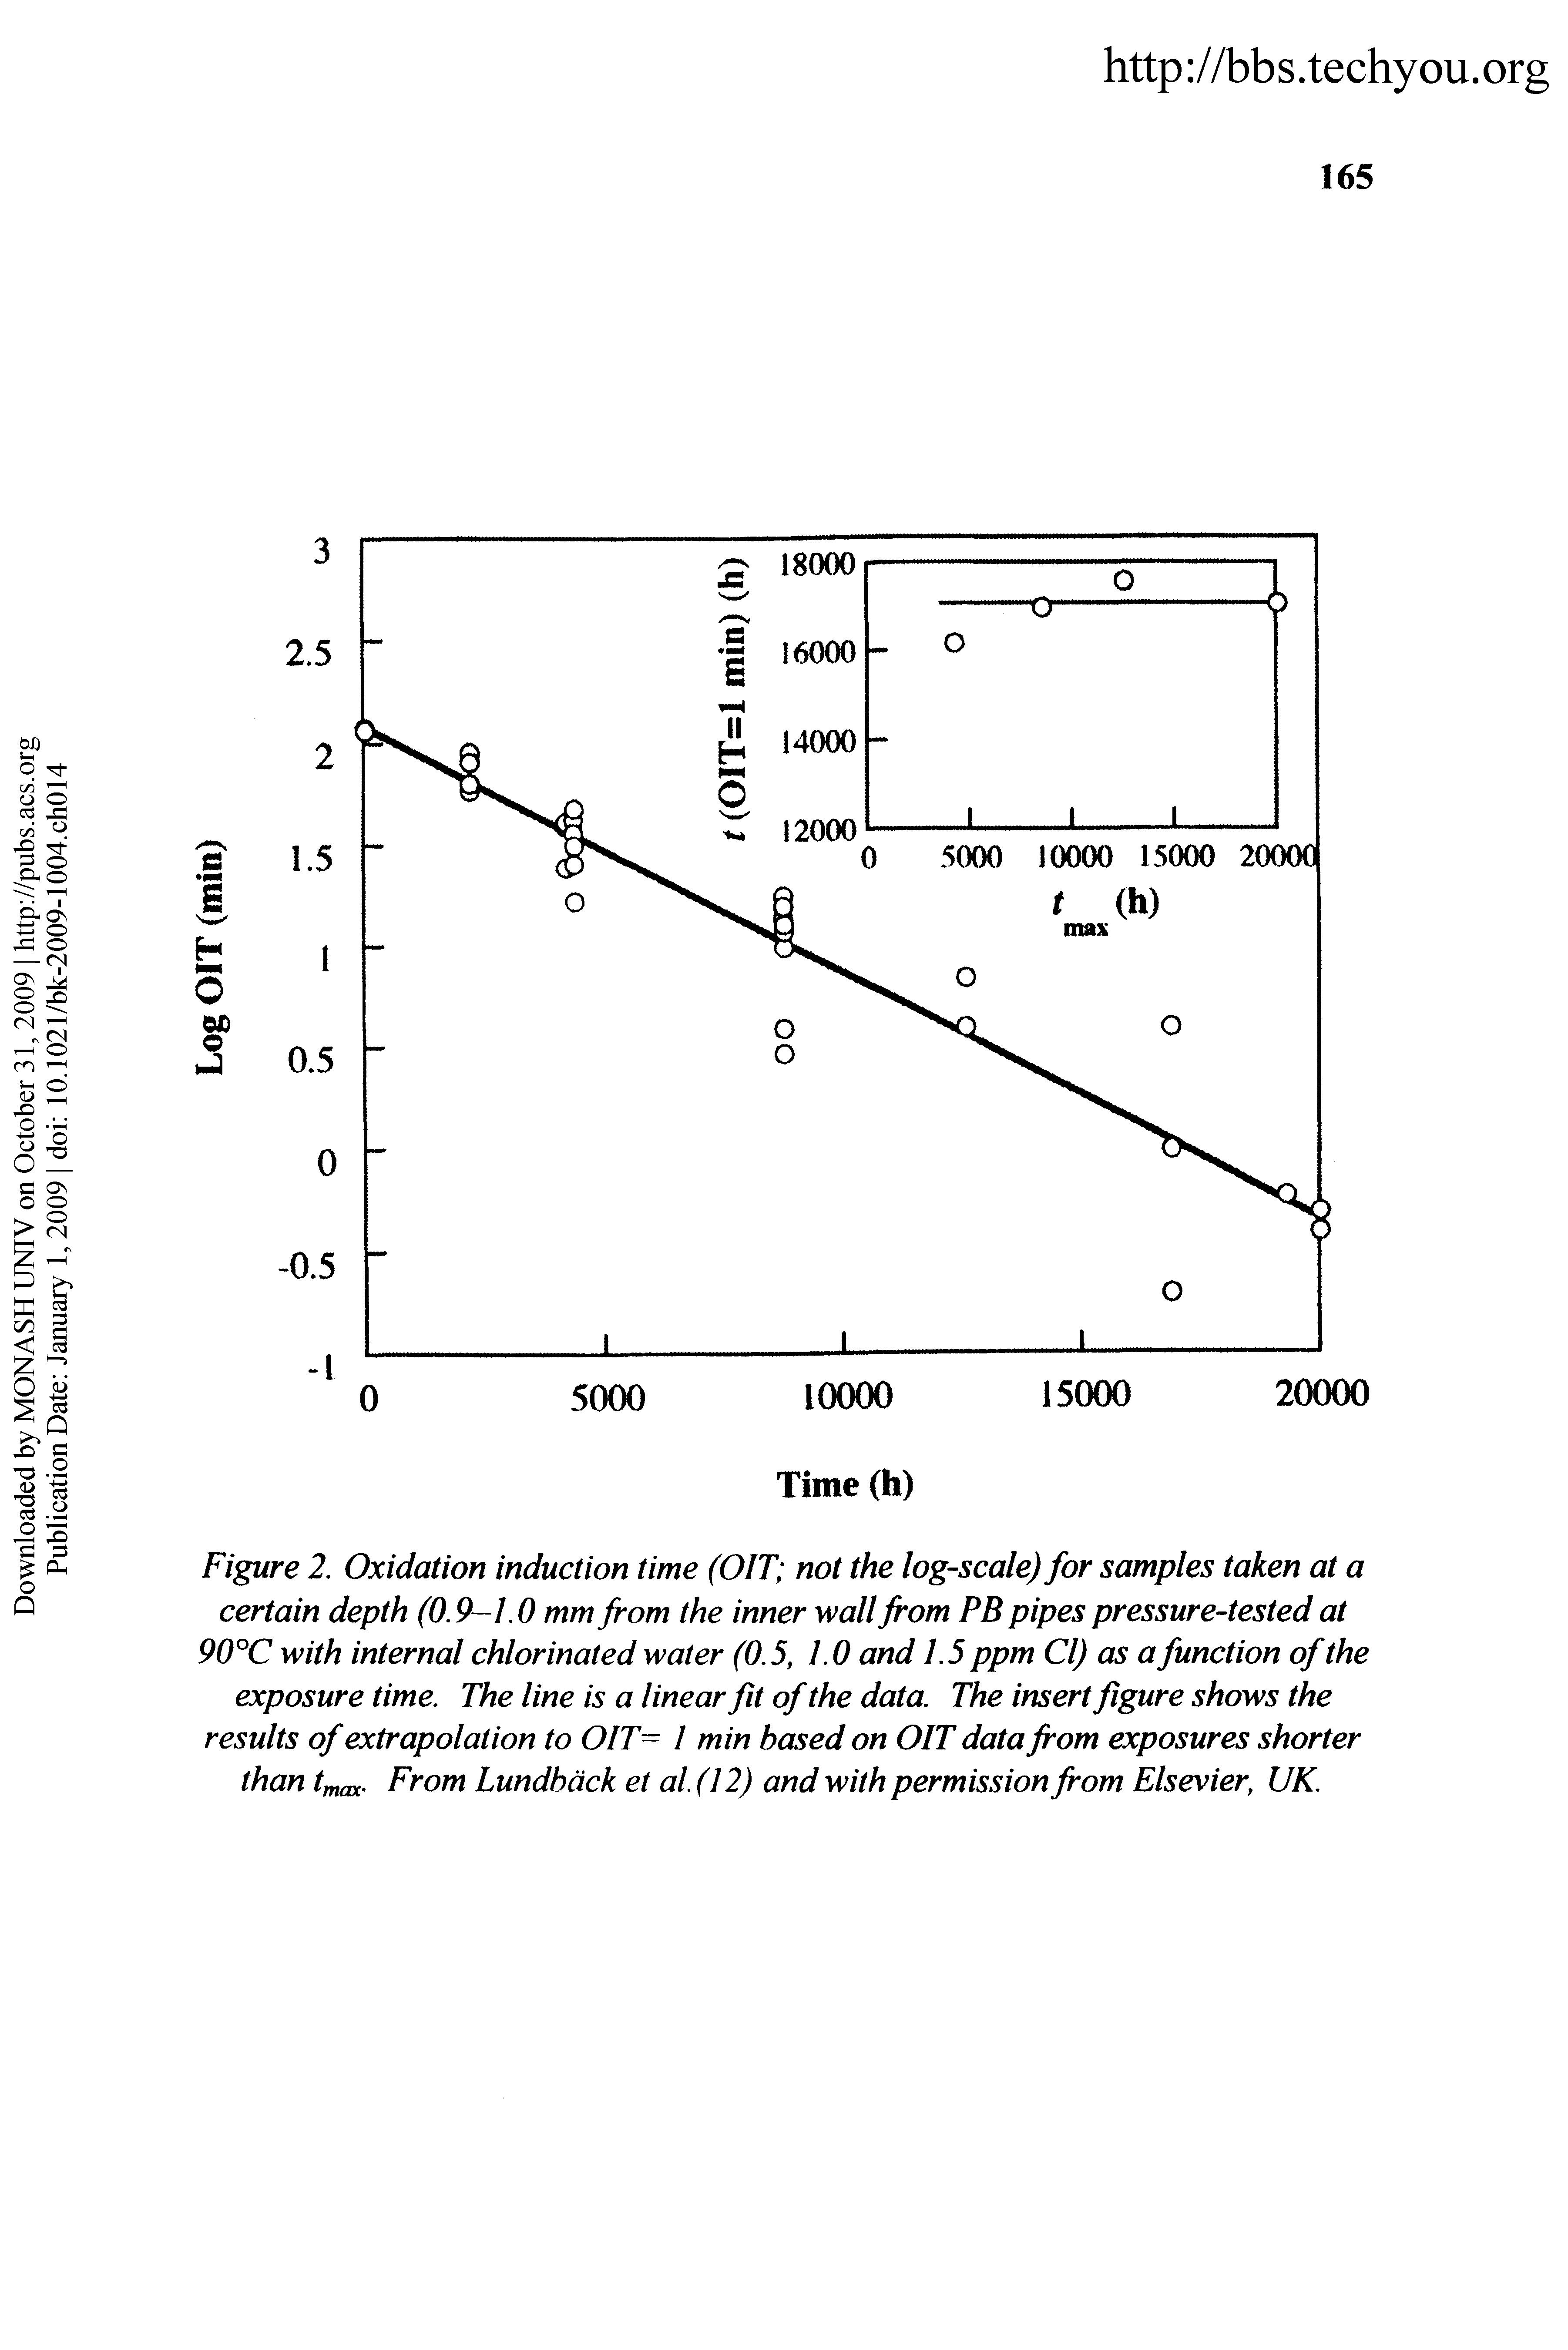 Figure 2. Oxidation induction time (OIT not the log-scale) for samples taken at a certain depth (0.9-1.0 mm from the inner wall from PB pipes pressure-tested at 90 C with internal chlorinated water (0.5, 1.0 and 1.5 ppm Cl) as a function of the exposure time. The line is a linear fit of the data. The insert figure shows the results of extrapolation to 01T= 1 min based on OIT data from exposures shorter than tfnax- From Lundback et al.(12) and with permission from Elsevier, UK.